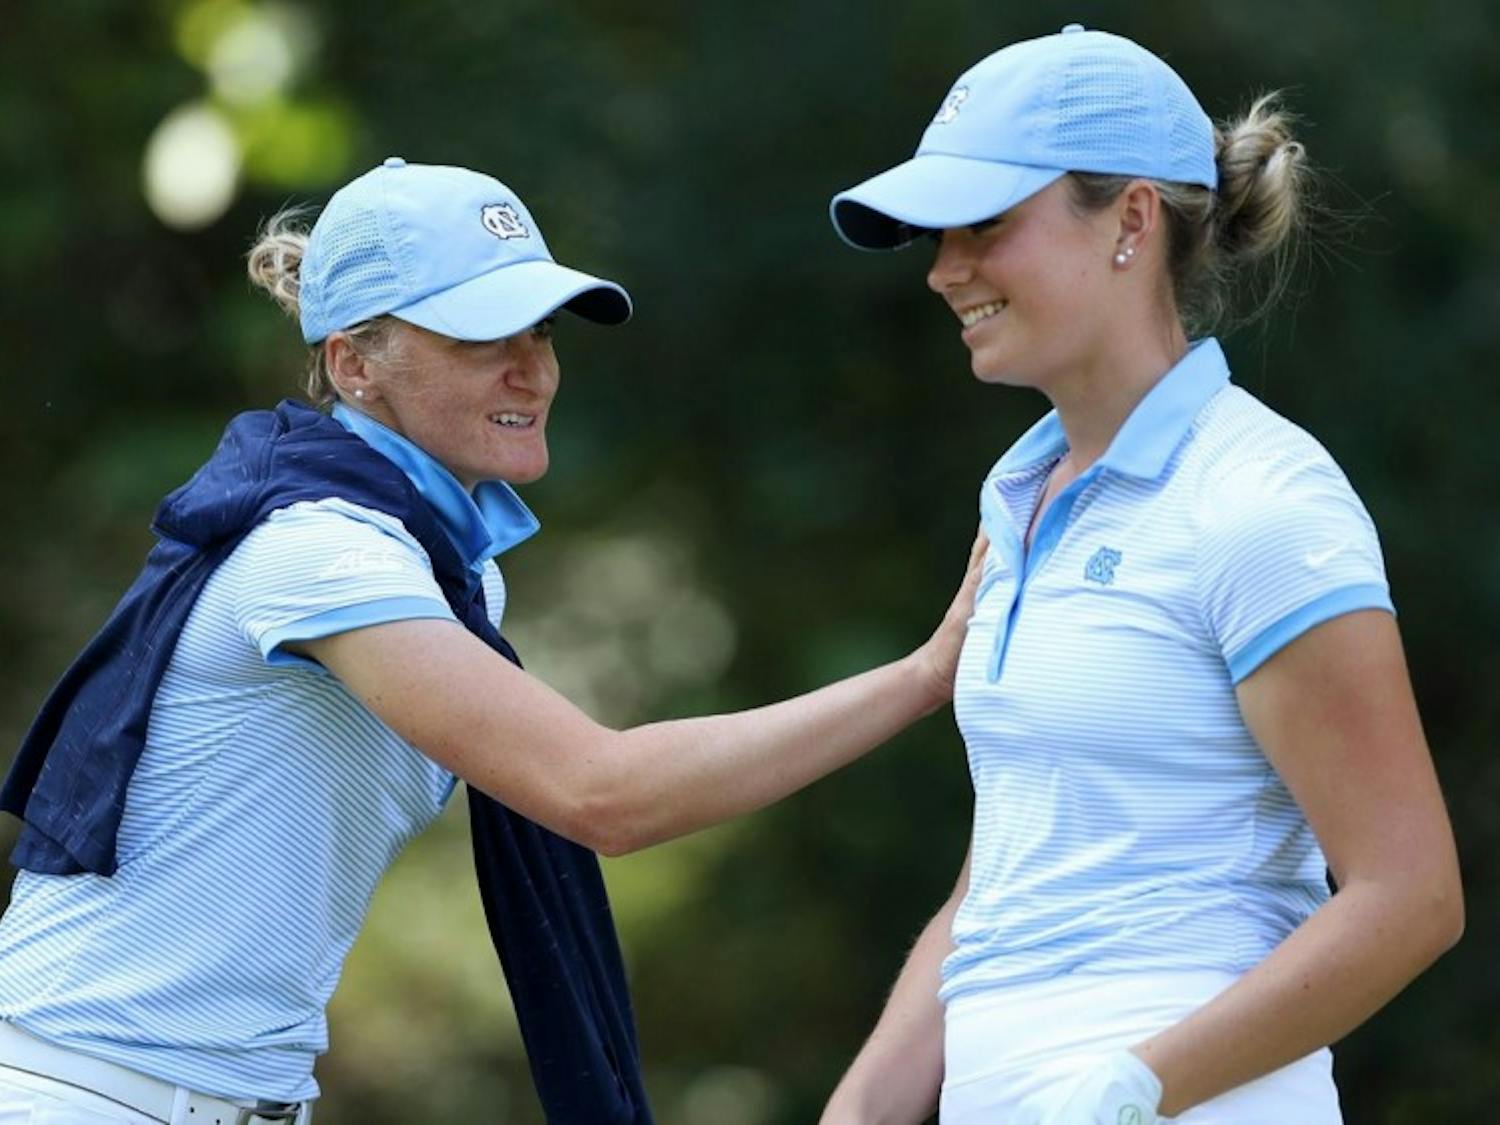 Junior golfer Kelly Whaley (right) jokes with associate head coach Aimee Neff during the Briar's Creek Invitational in March. Photo courtesy of UNC Athletic Department.